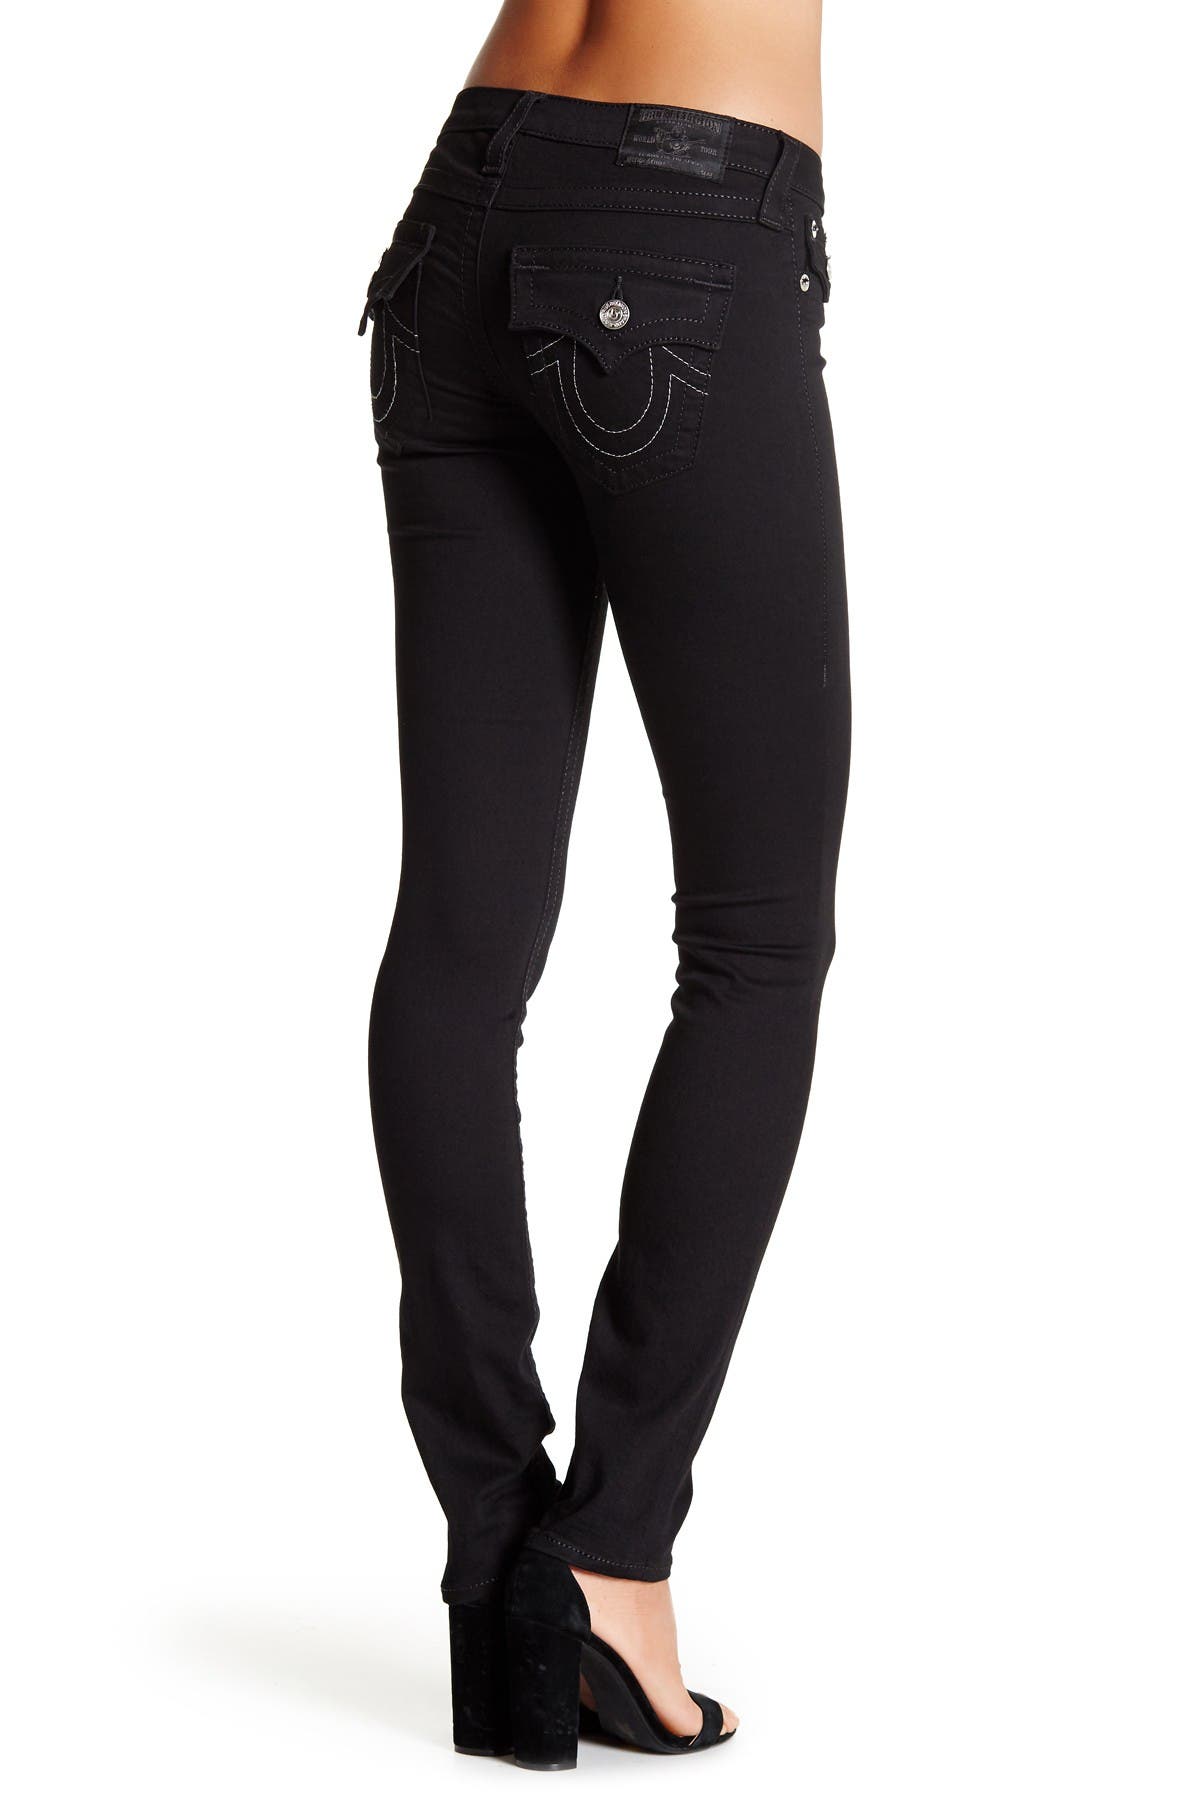 womens skinny jeans with back flap pockets